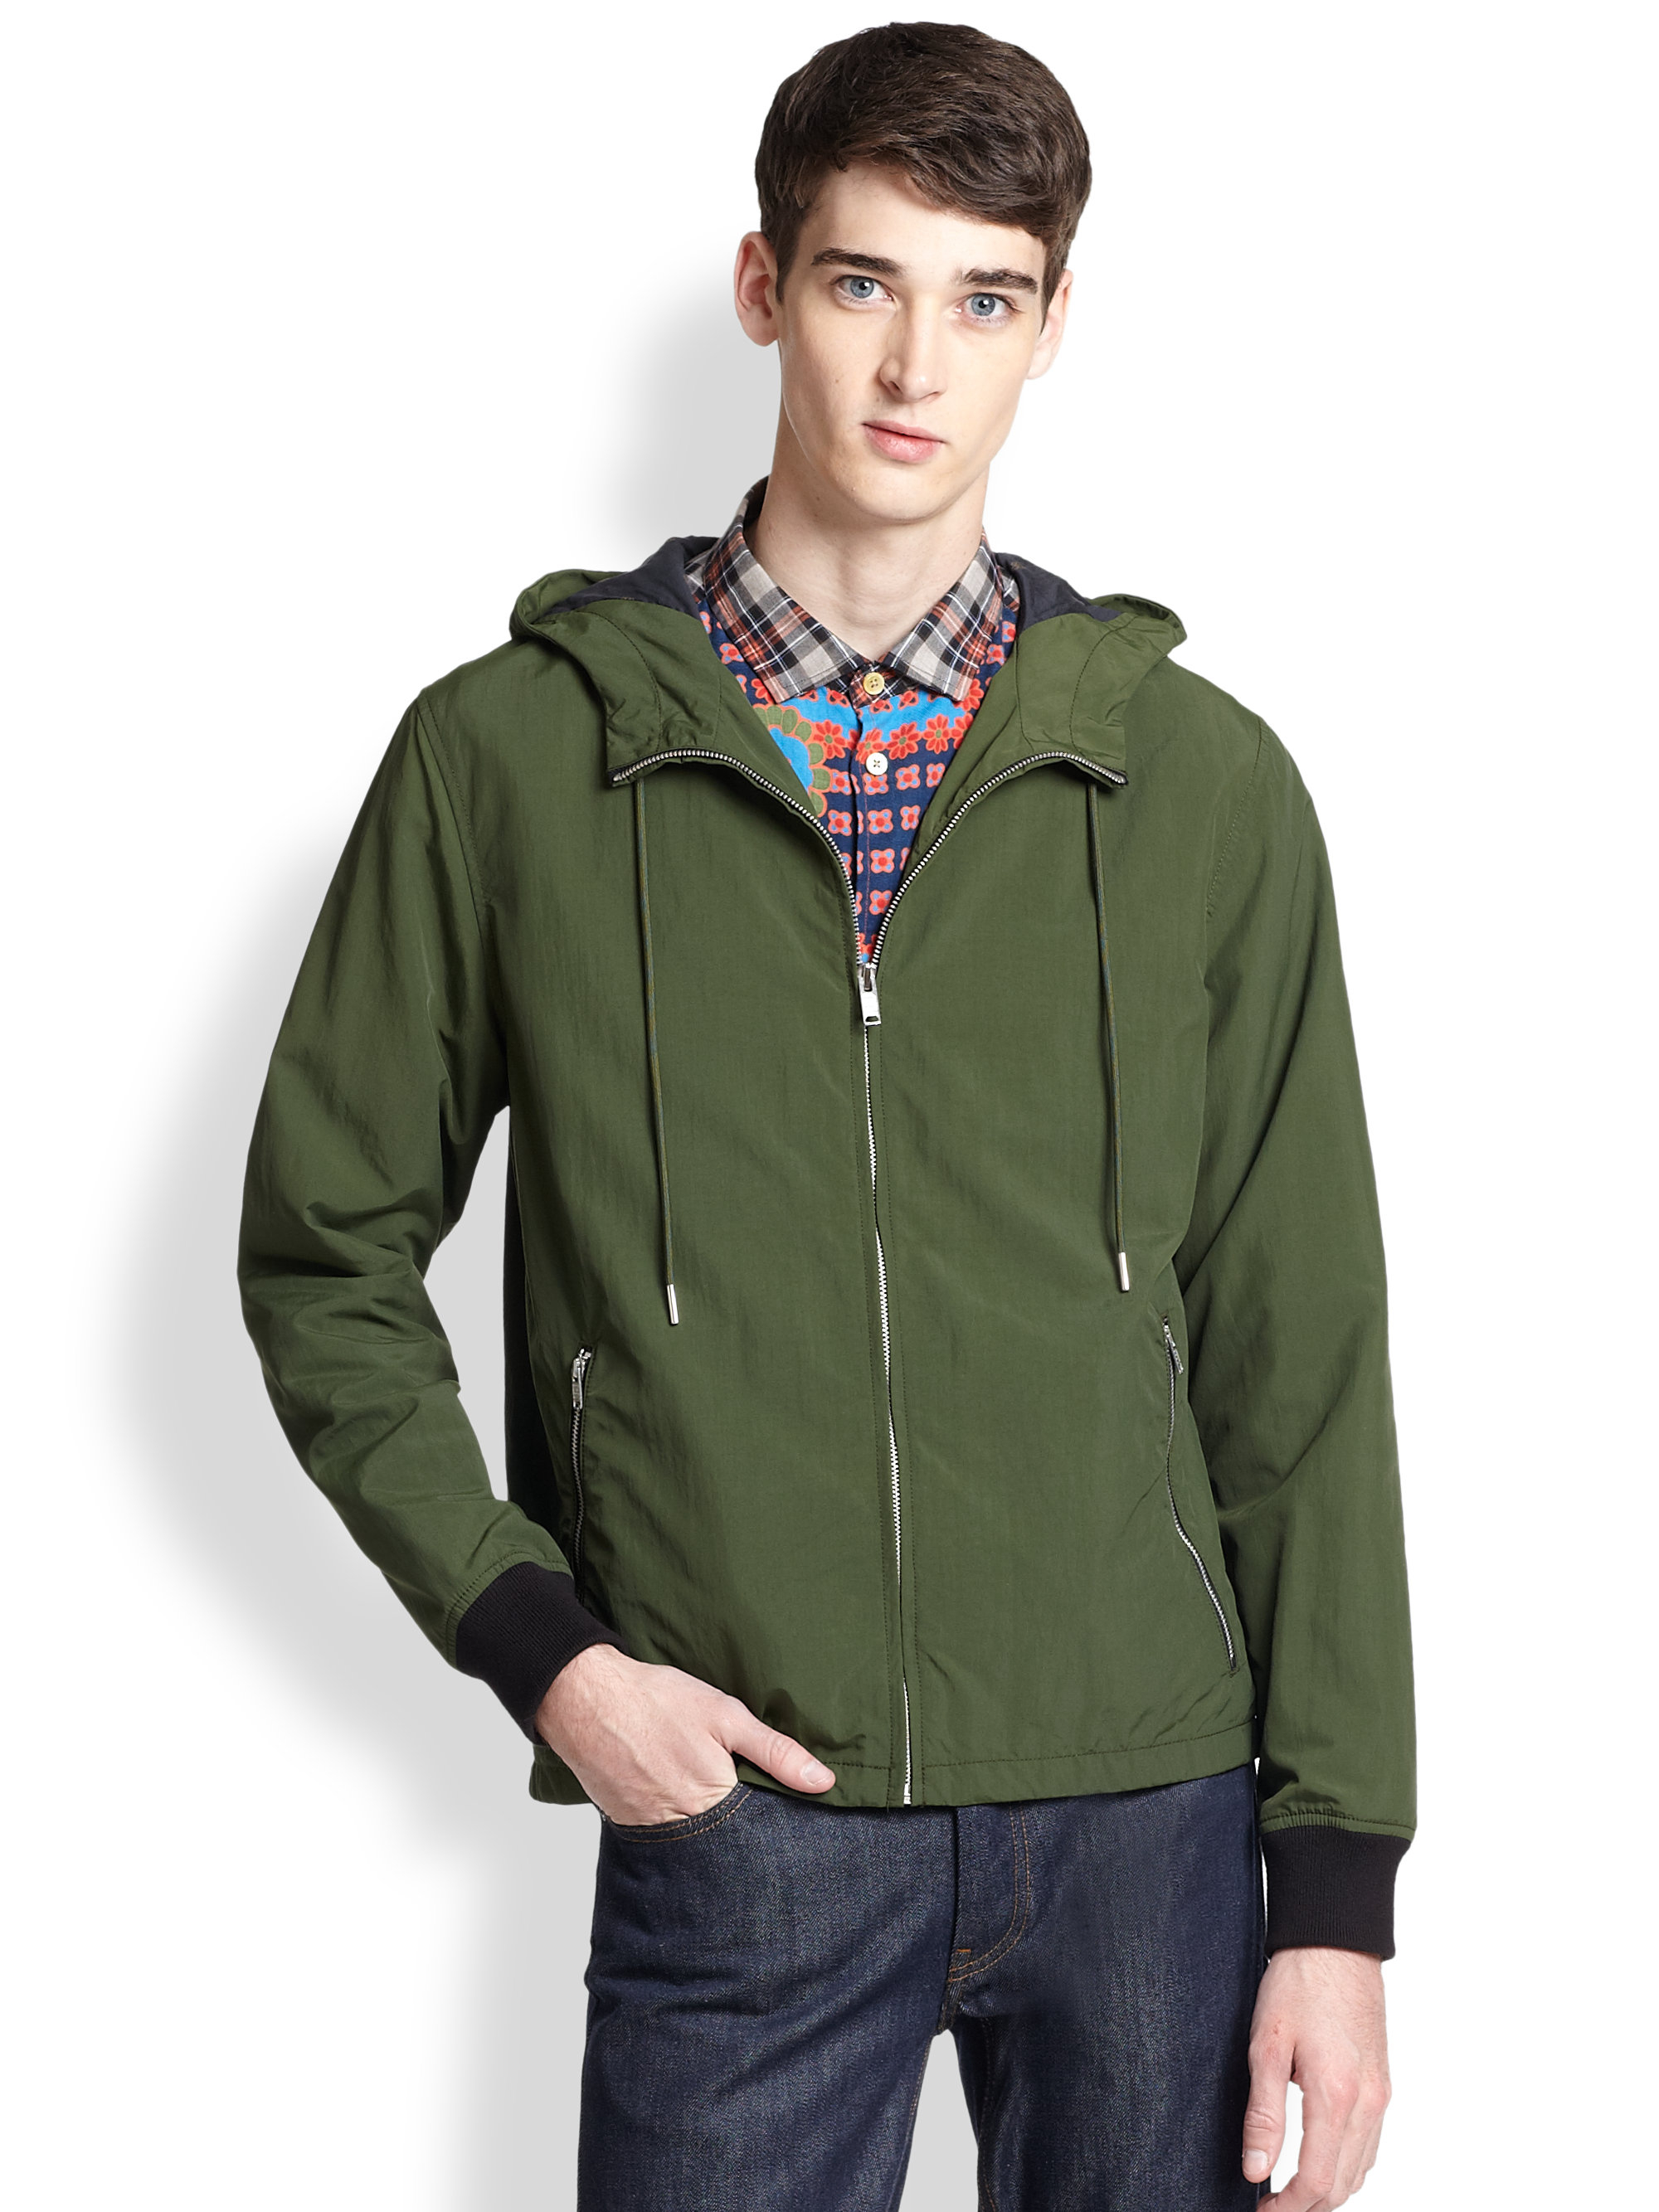 Lyst - Marc By Marc Jacobs Hooded Jacket in Green for Men